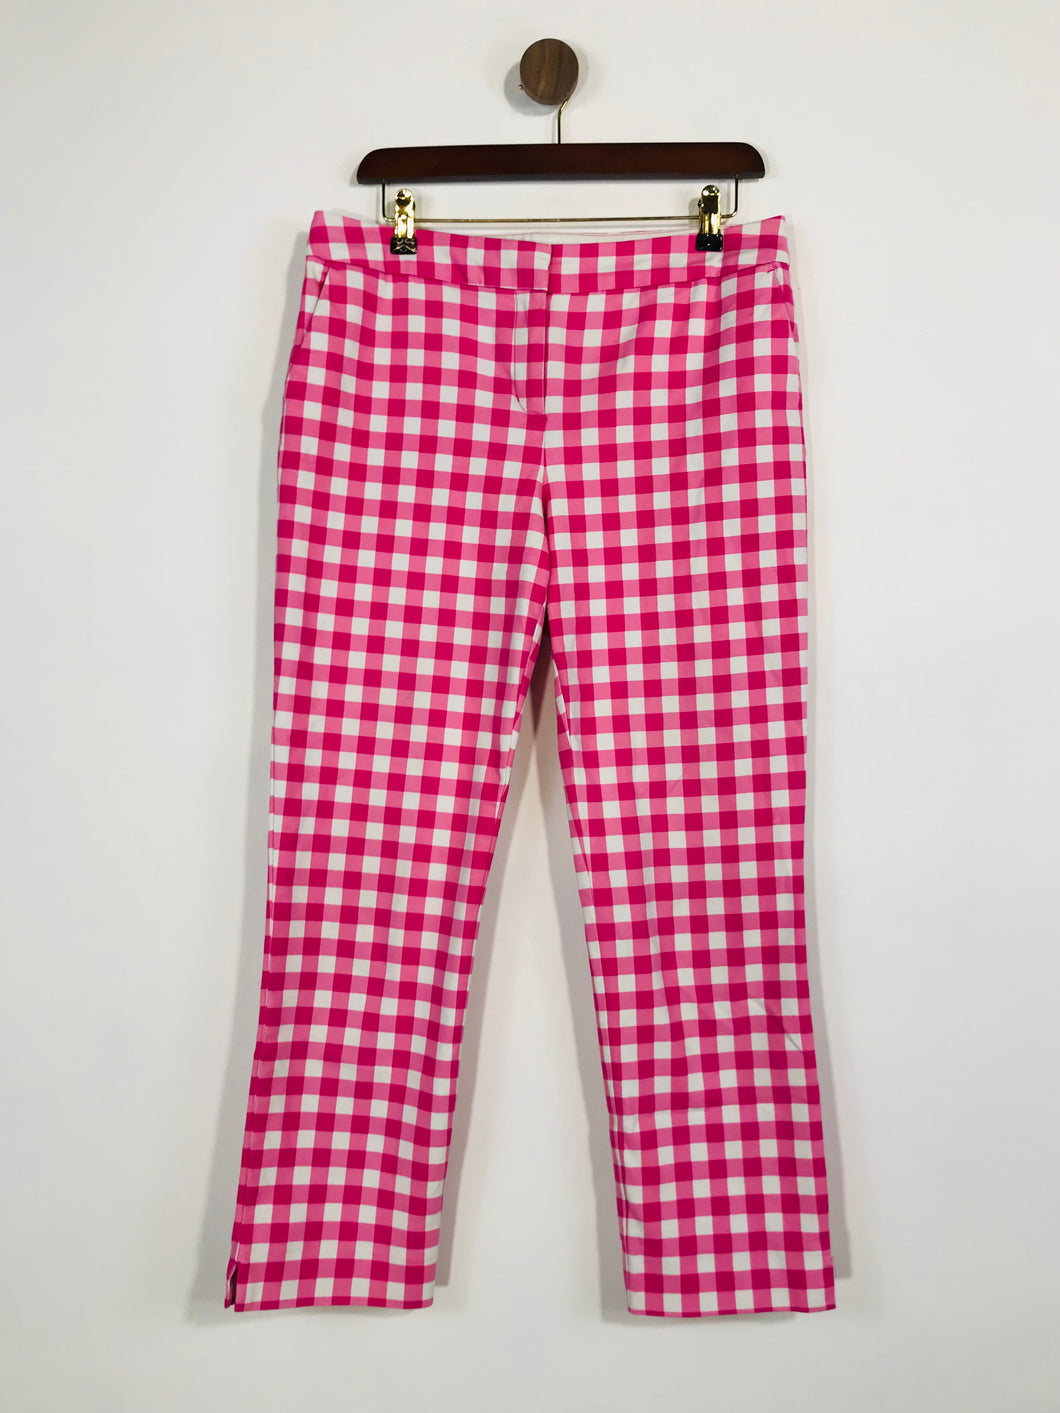 Boden Women's Cotton Gingham Chino Trousers | UK12 | Pink